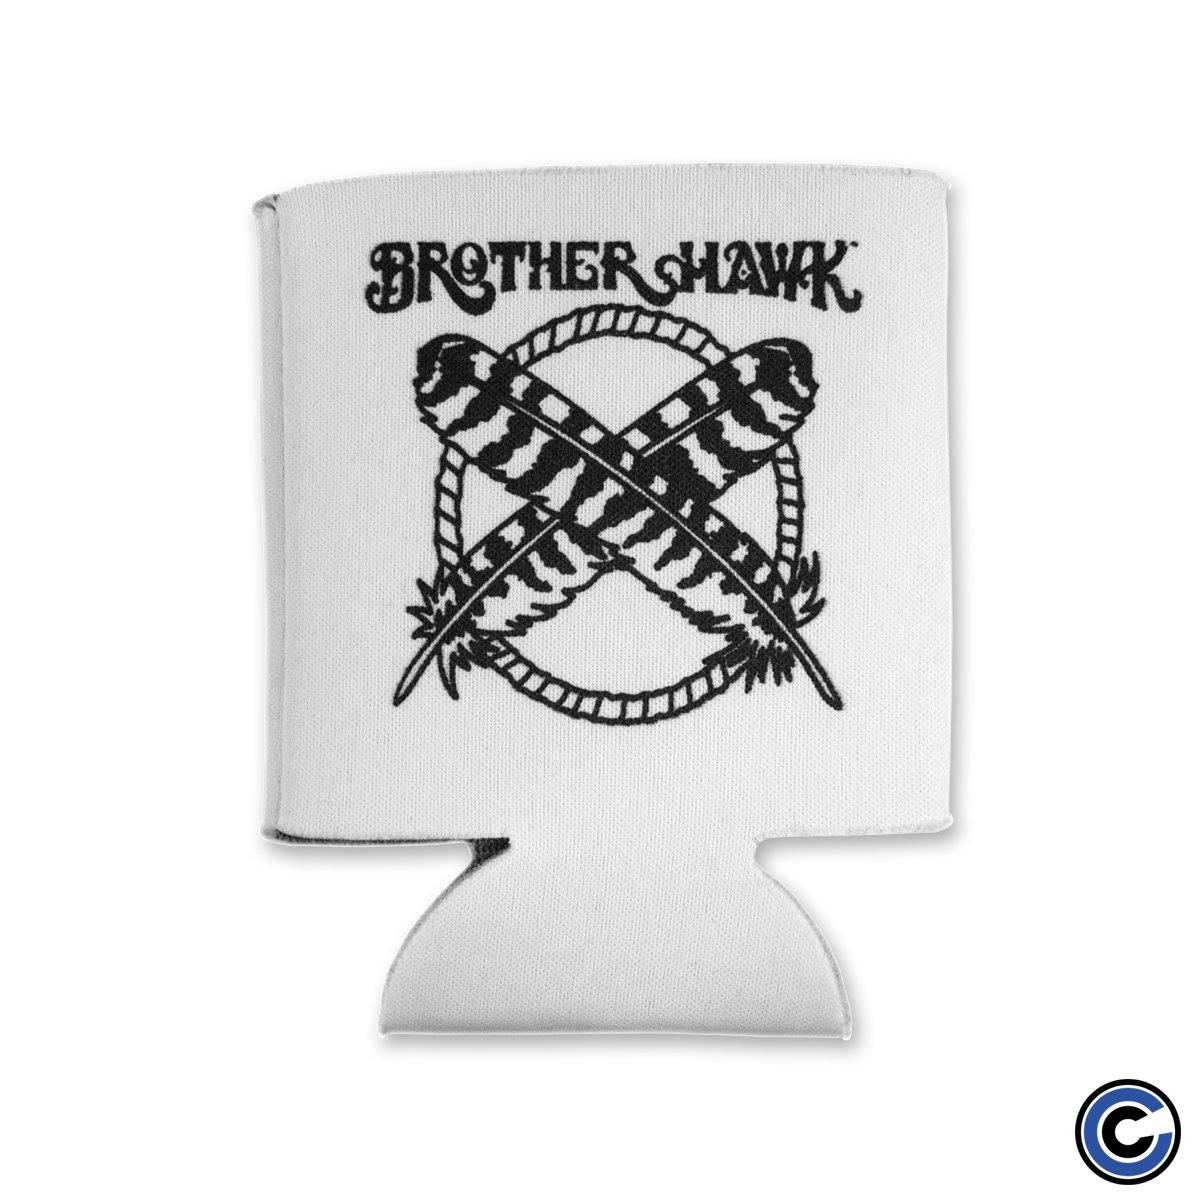 Buy – Brother Hawk "Feathers" Koozie – Band & Music Merch – Cold Cuts Merch